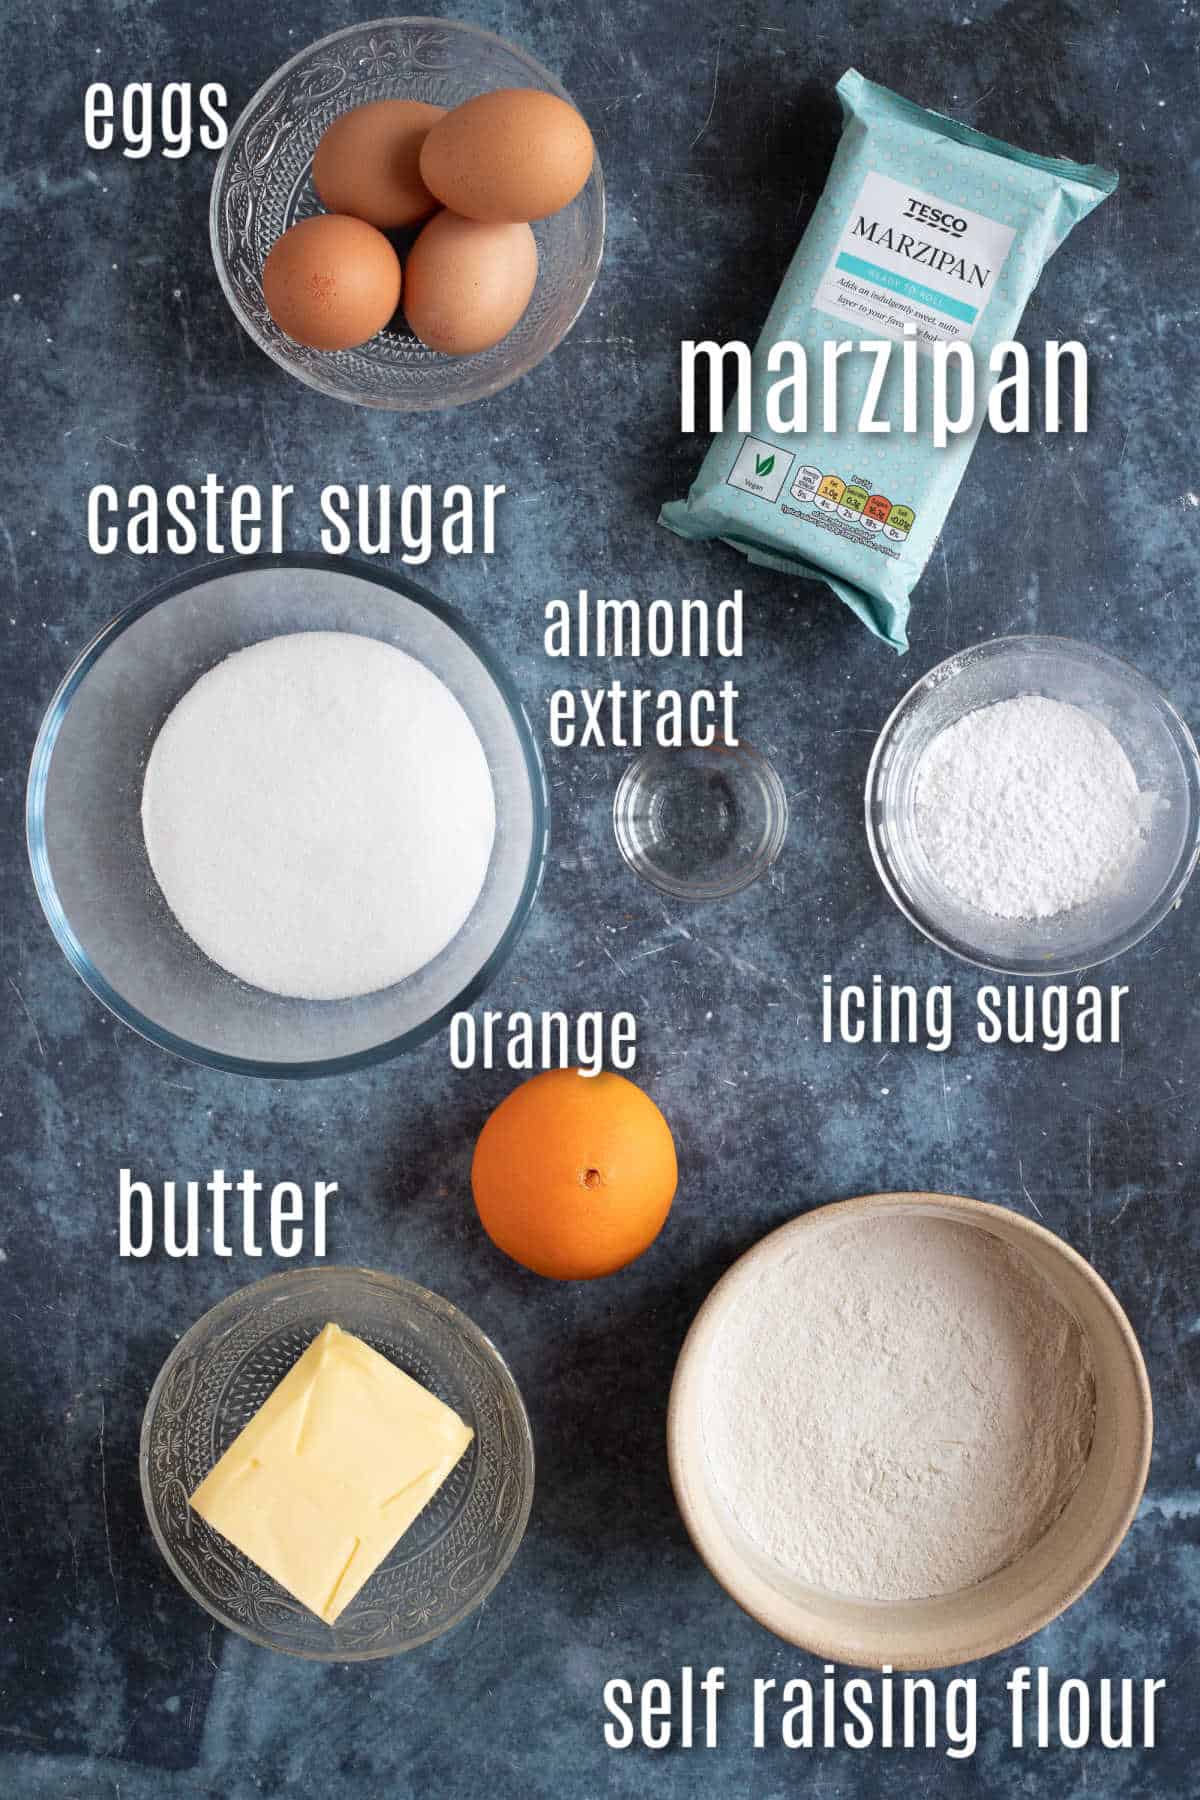 Ingredients for marzipan loaf cake.